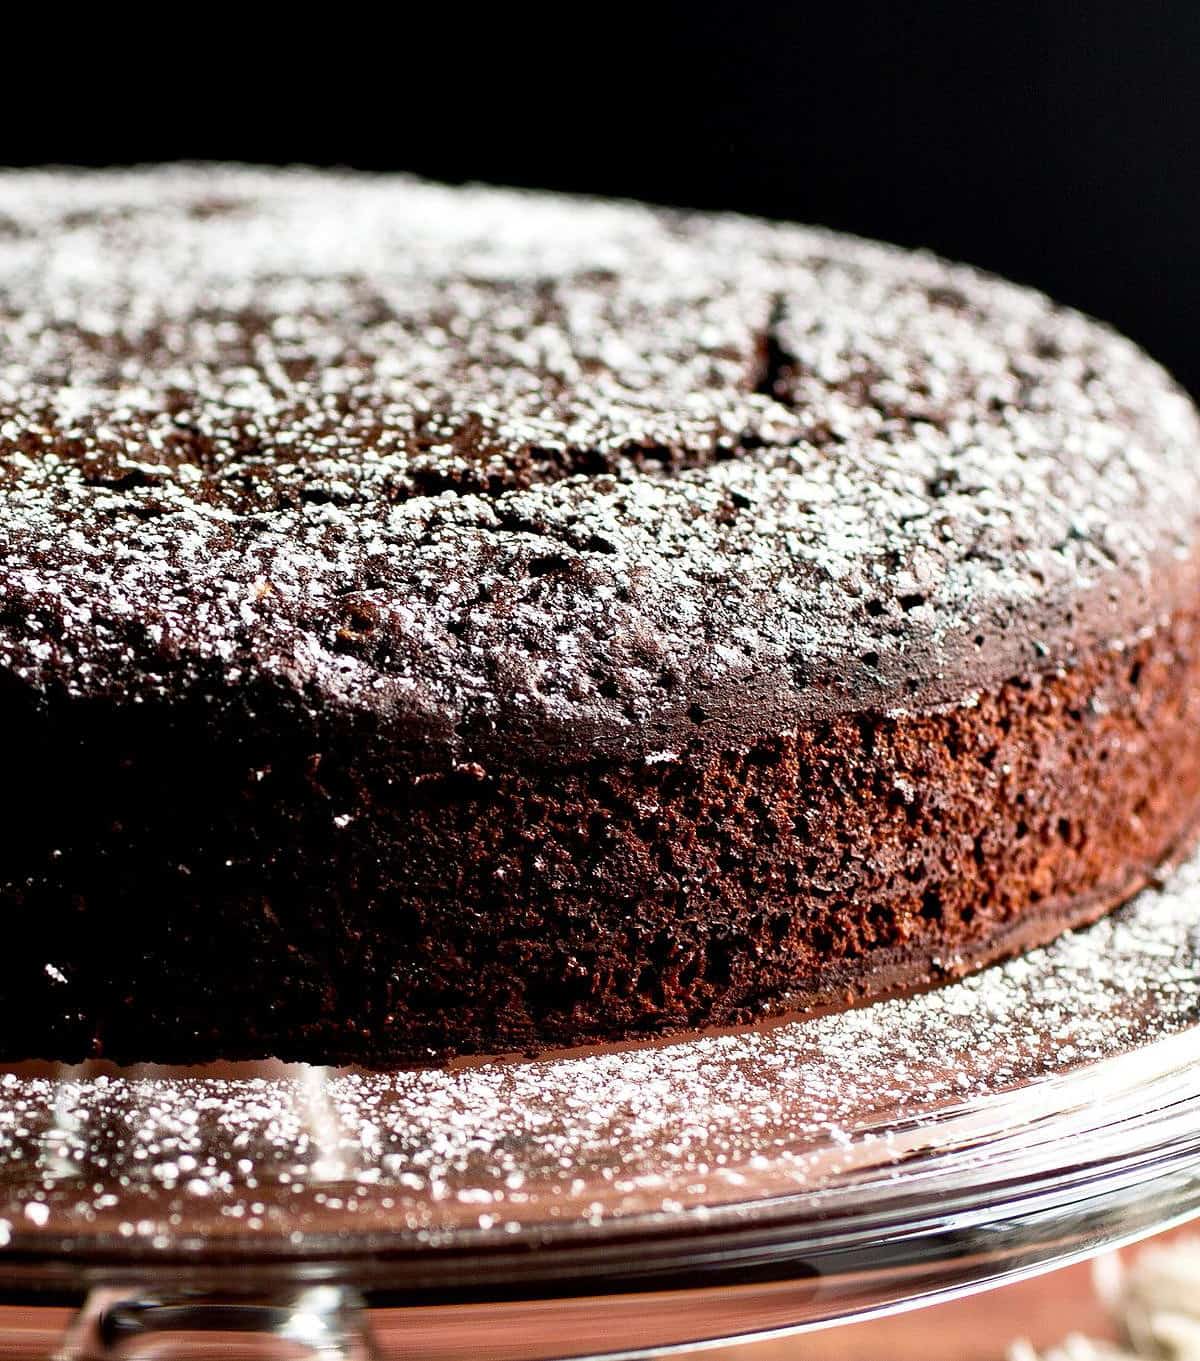  Rich and decadent chocolate cake